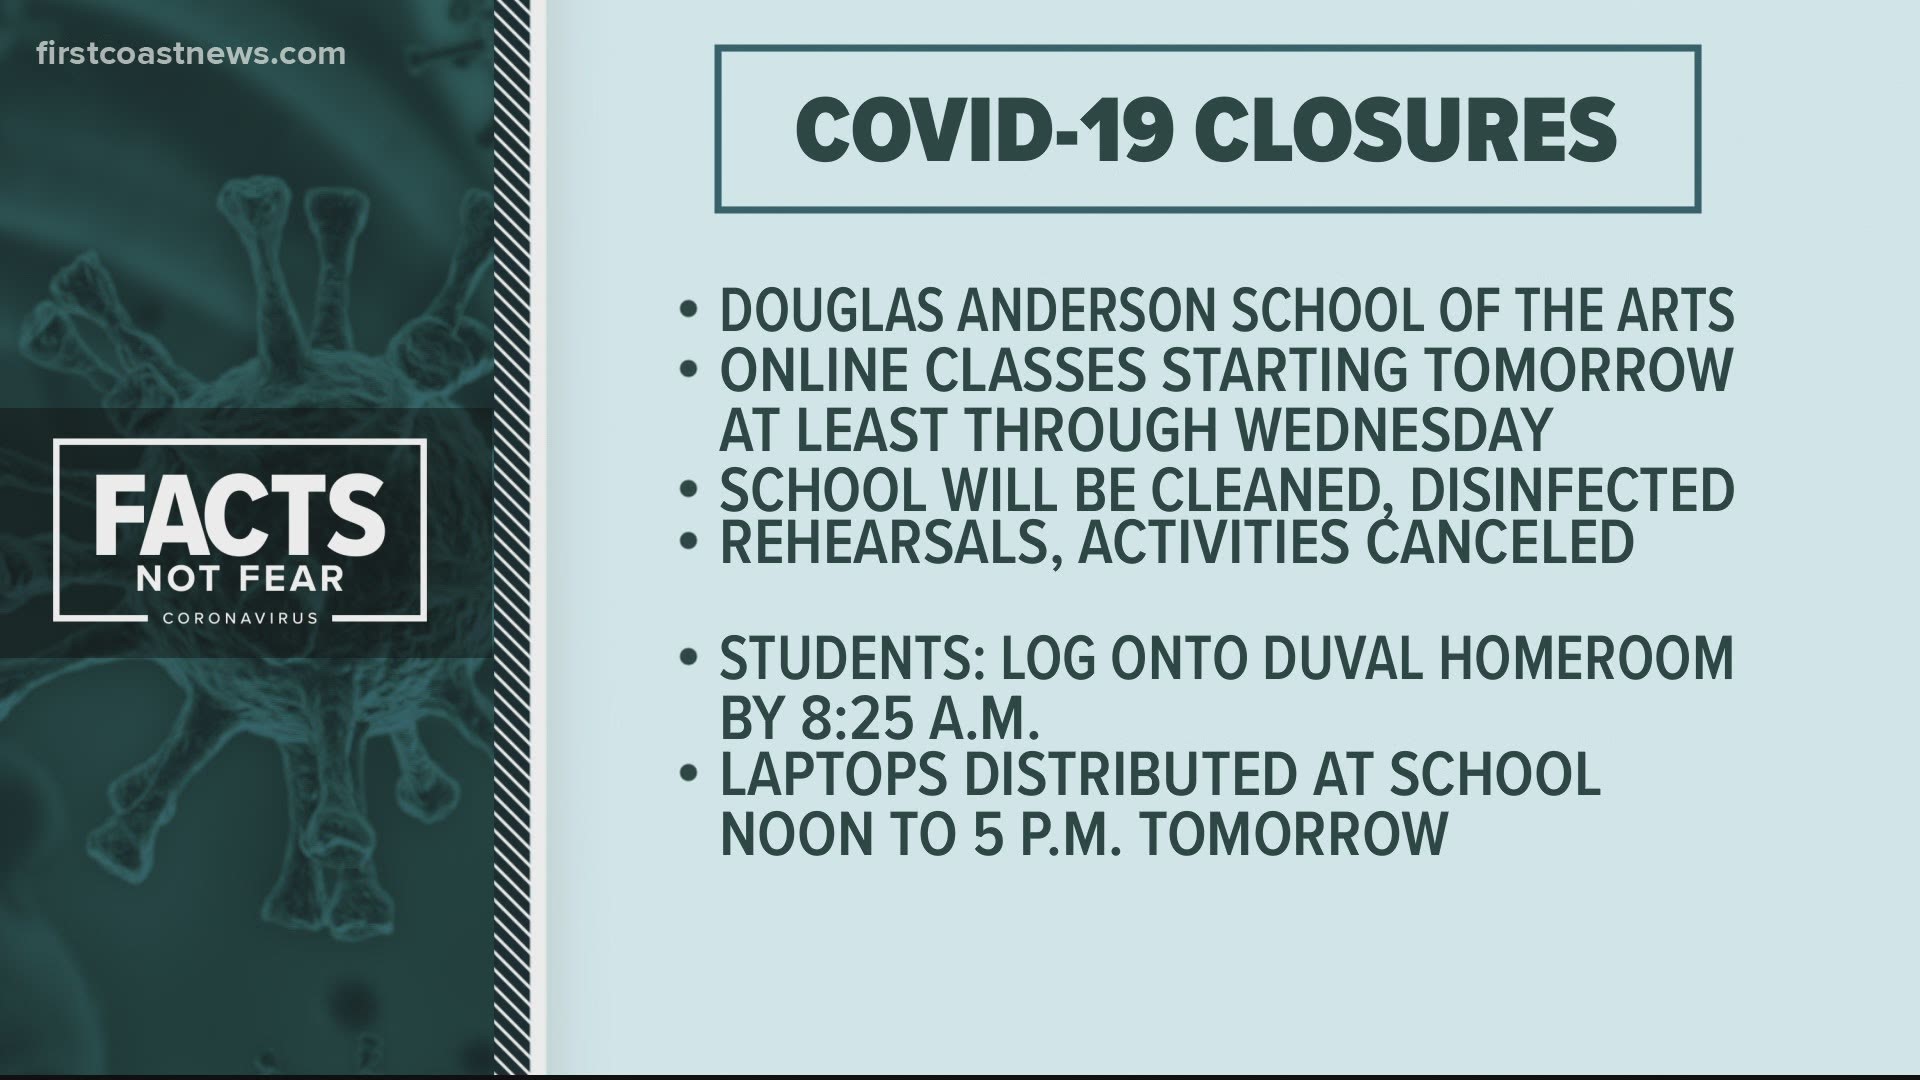 A spokesperson for Douglas Anderson said the school will be on Duval HomeRoom at least through Oct. 21.